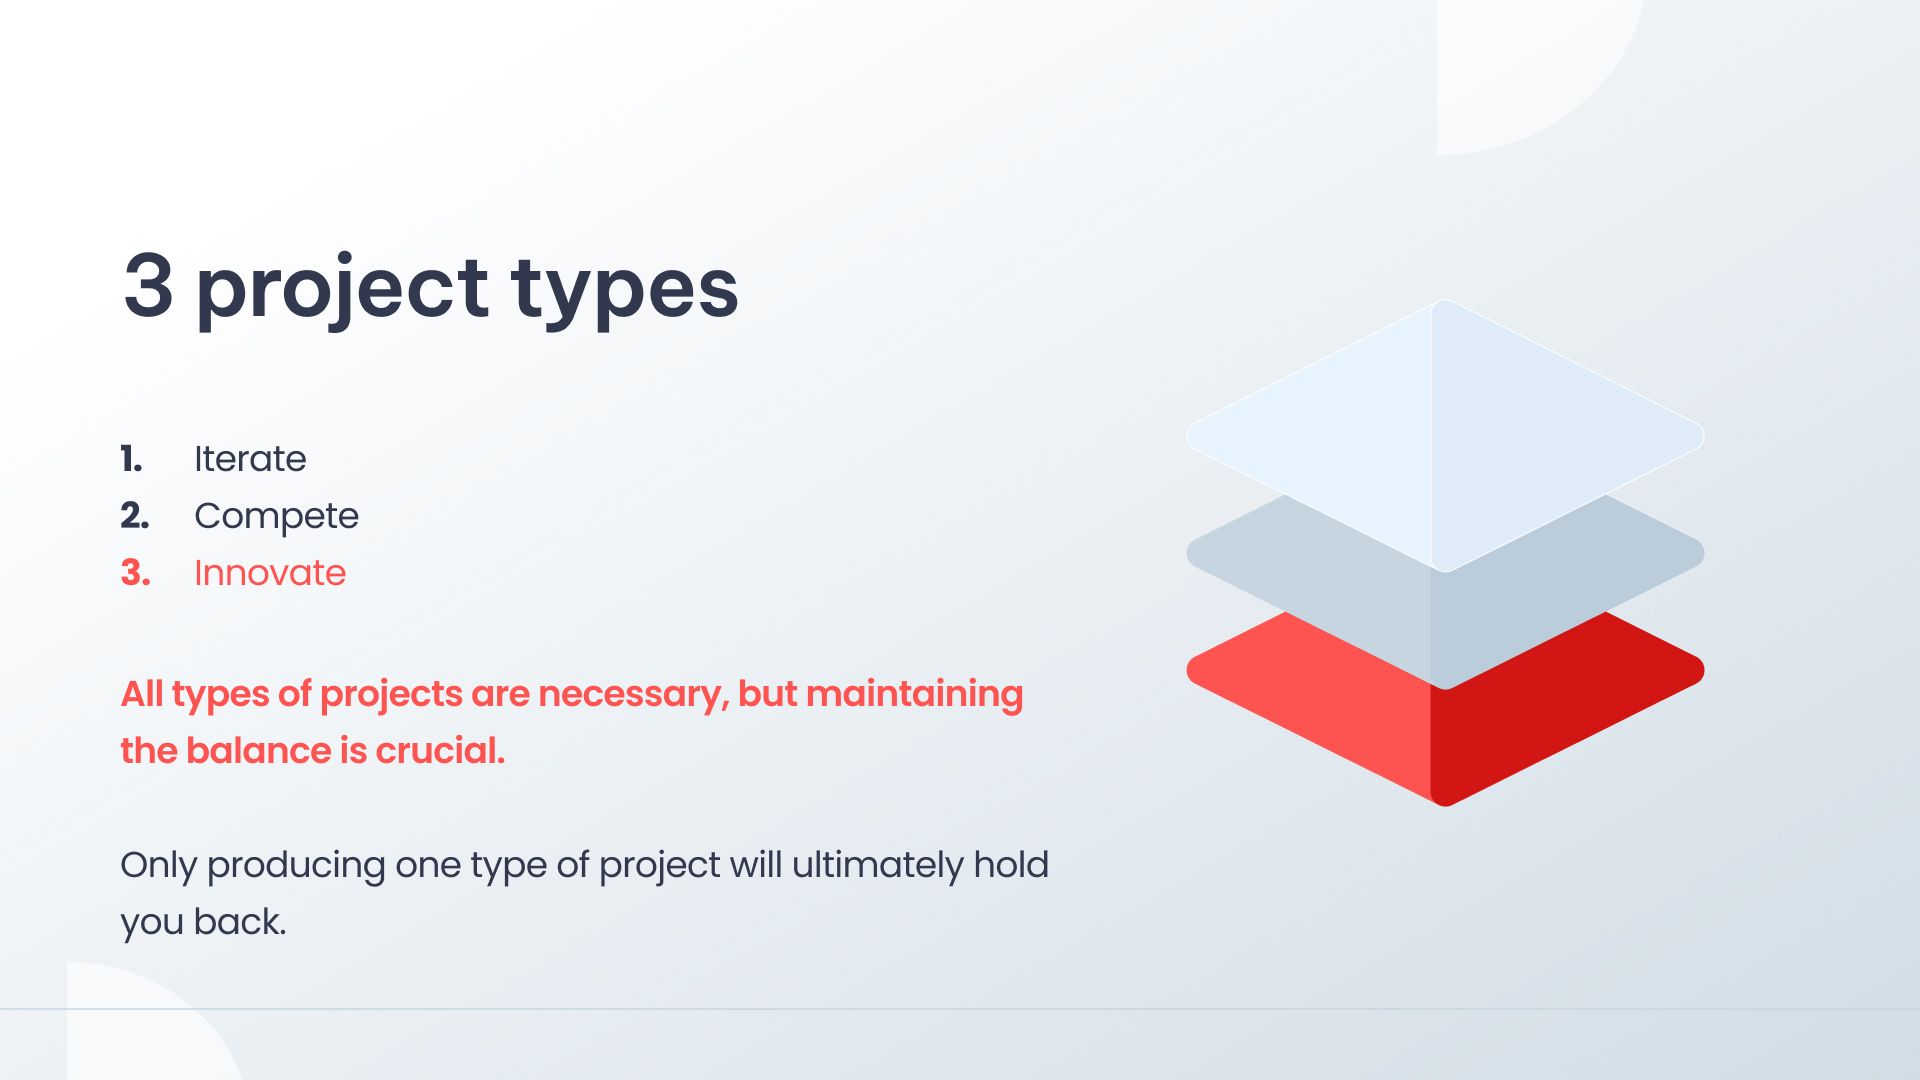 three types of projects are described